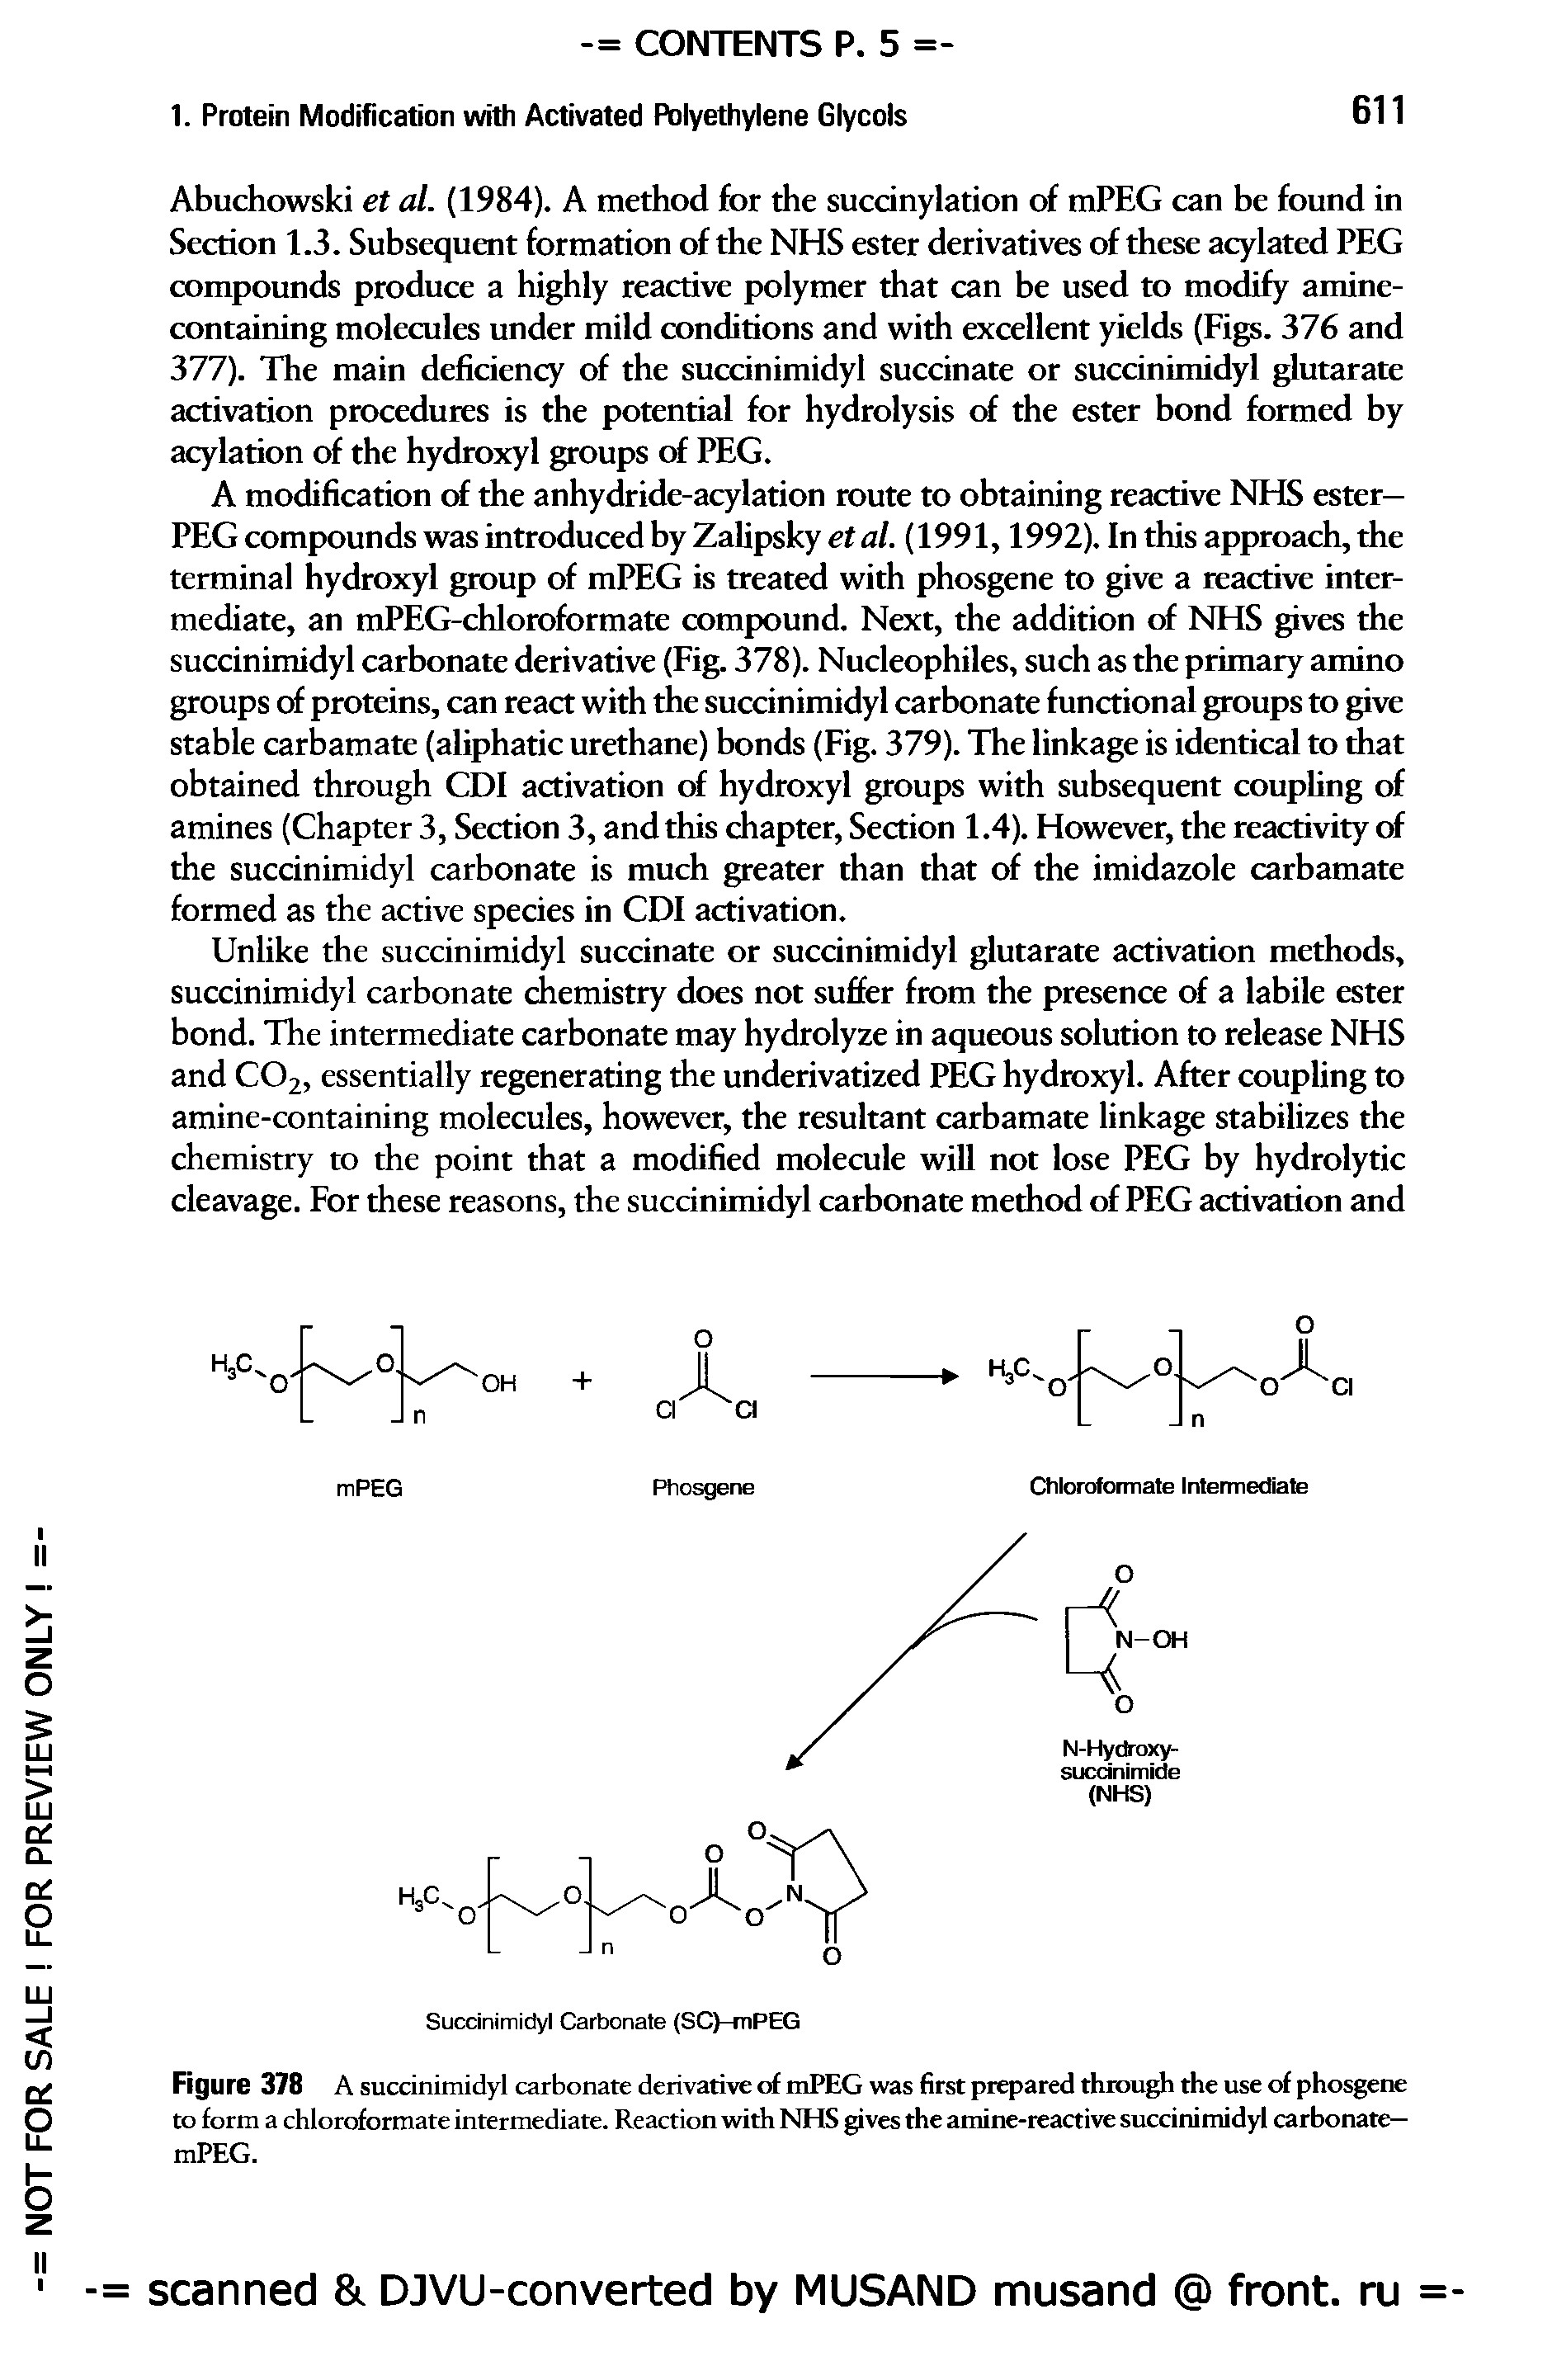 Figure 378 A succinimidyl carbonate derivative of mPEG was first prepared through the use of phosgene to form a chloroformate intermediate. Reaction with NHS gives the amine-reactive succinimidyl carbonate— mPEG.